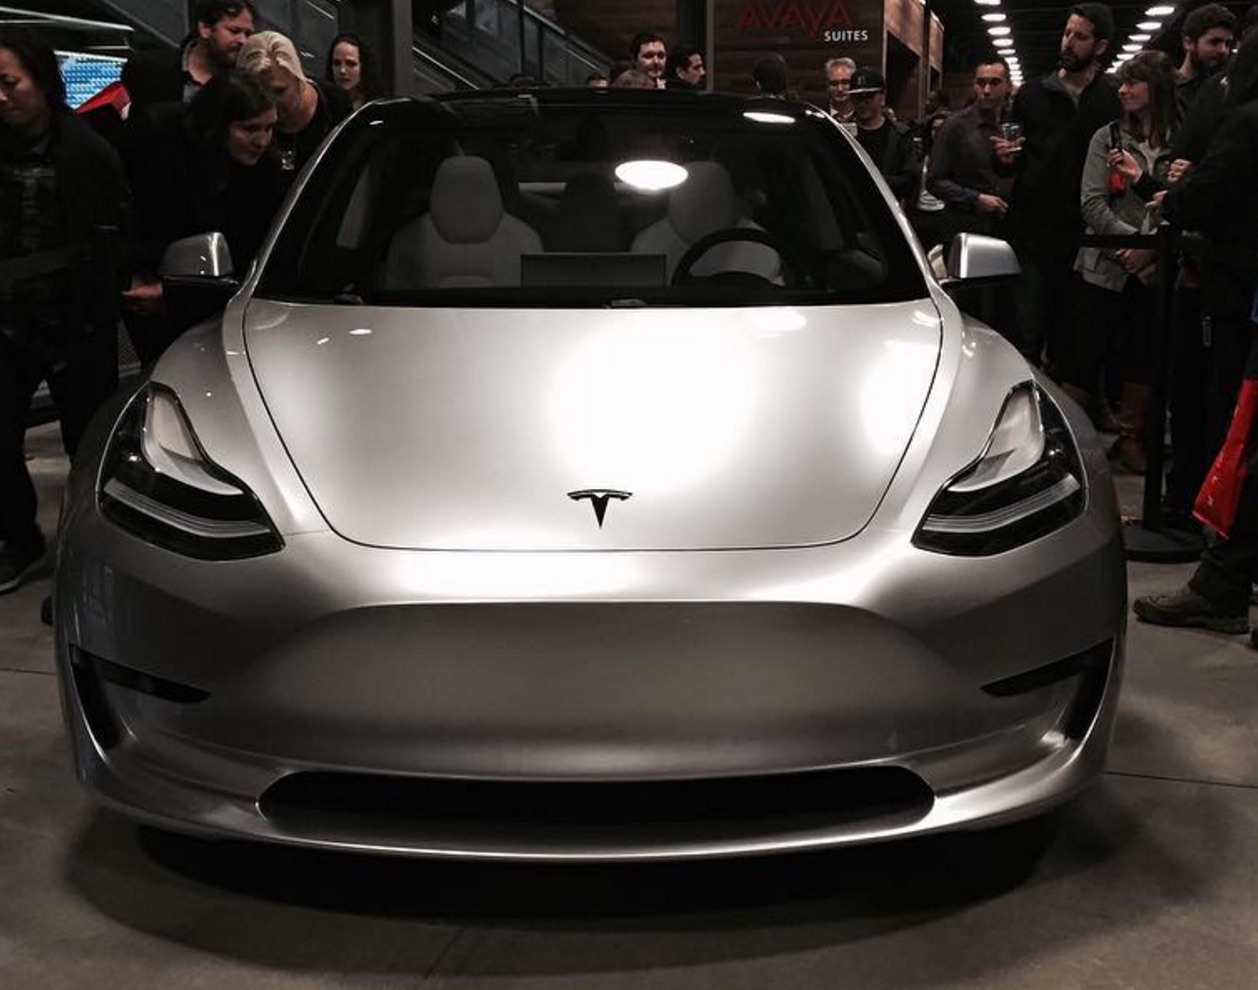 Gorgeous silver Model 3 becomes centerpiece at Tesla employee party